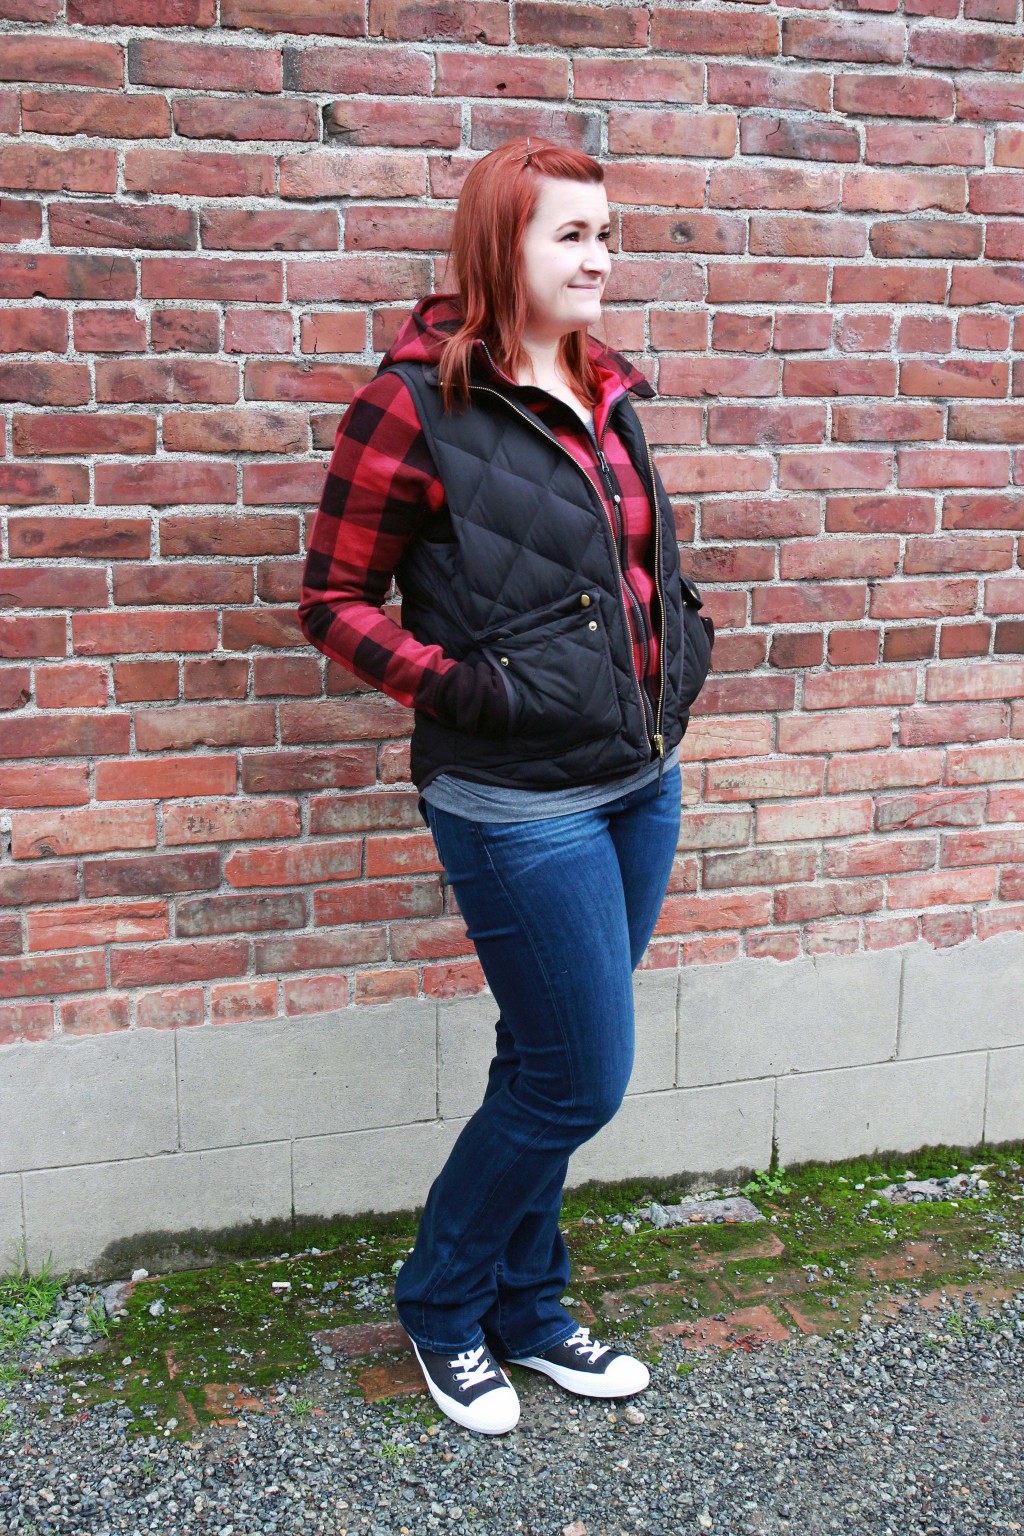 Snohomish Personal Style Blogger Kate Retherford of All Things Kate